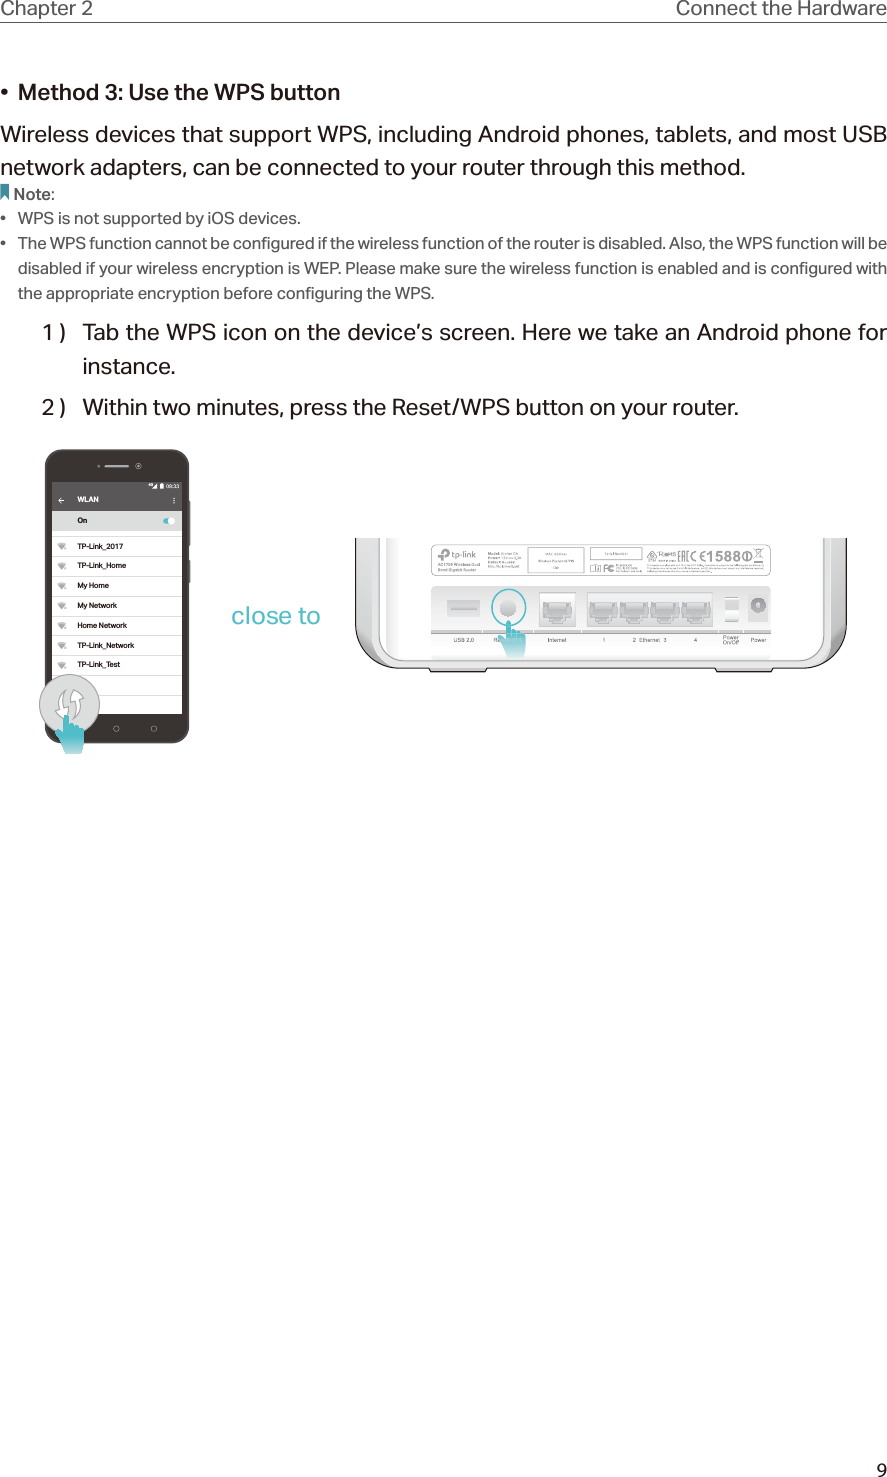 9Chapter 2 Connect the Hardware•  Method 3: Use the WPS buttonWireless devices that support WPS, including Android phones, tablets, and most USB network adapters, can be connected to your router through this method.Note:•  WPS is not supported by iOS devices.•  The WPS function cannot be configured if the wireless function of the router is disabled. Also, the WPS function will be disabled if your wireless encryption is WEP. Please make sure the wireless function is enabled and is configured with the appropriate encryption before configuring the WPS.1 )  Tab the WPS icon on the device’s screen. Here we take an Android phone for instance.2 )  Within two minutes, press the Reset/WPS button on your router. WLANOnTP-Link_2017TP-Link_HomeMy HomeMy NetworkHome NetworkTP-Link_NetworkTP-Link_Test4Gclose to